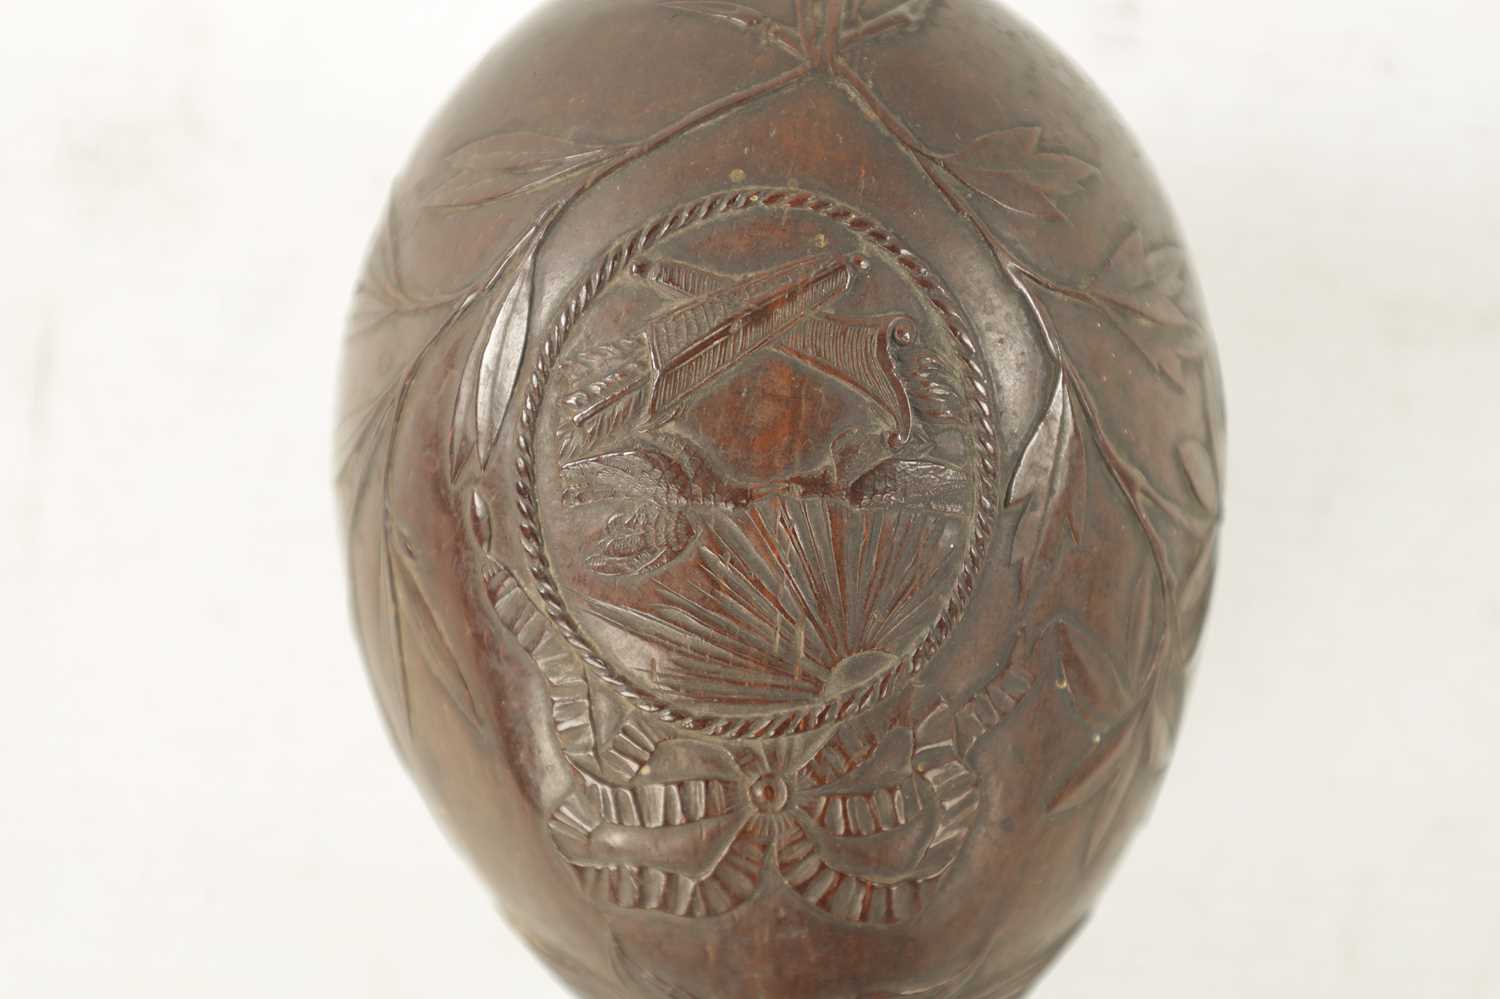 AN EARLY 19TH CENTURY EASTERN CARVED COCONUT BUGBEAR MONEYBOX - Image 3 of 4